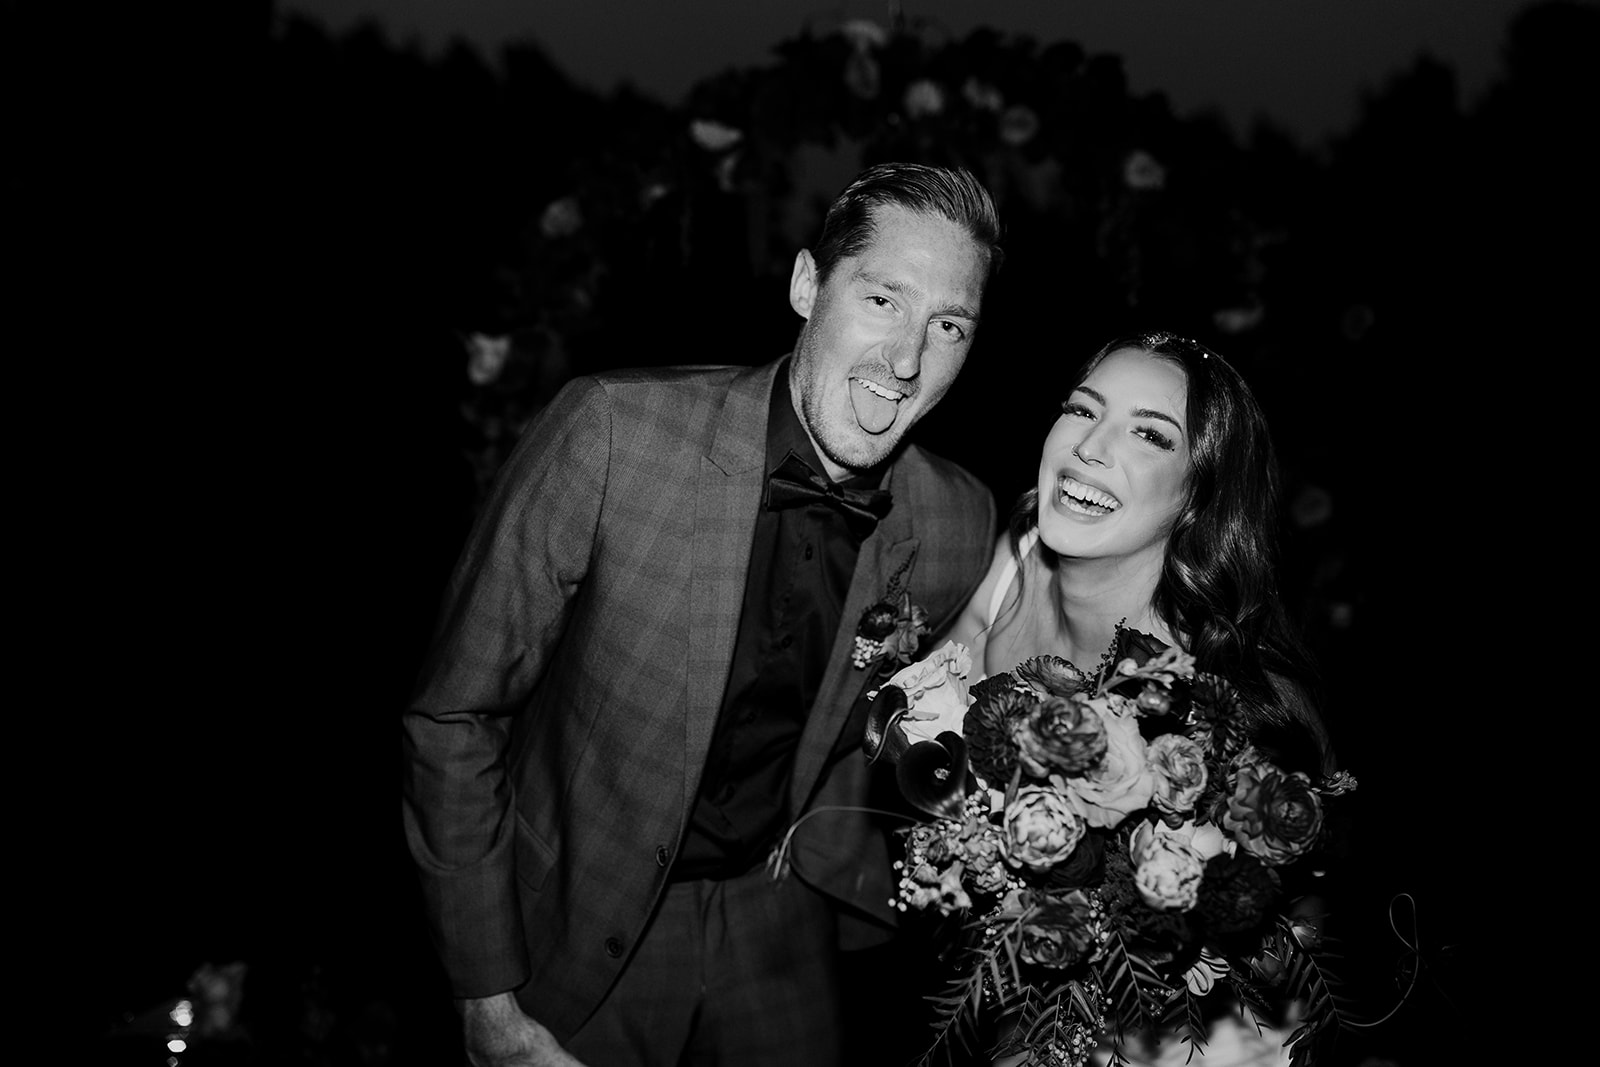 Black and white wedding photographs for fun couples. Evening outdoor reception photography